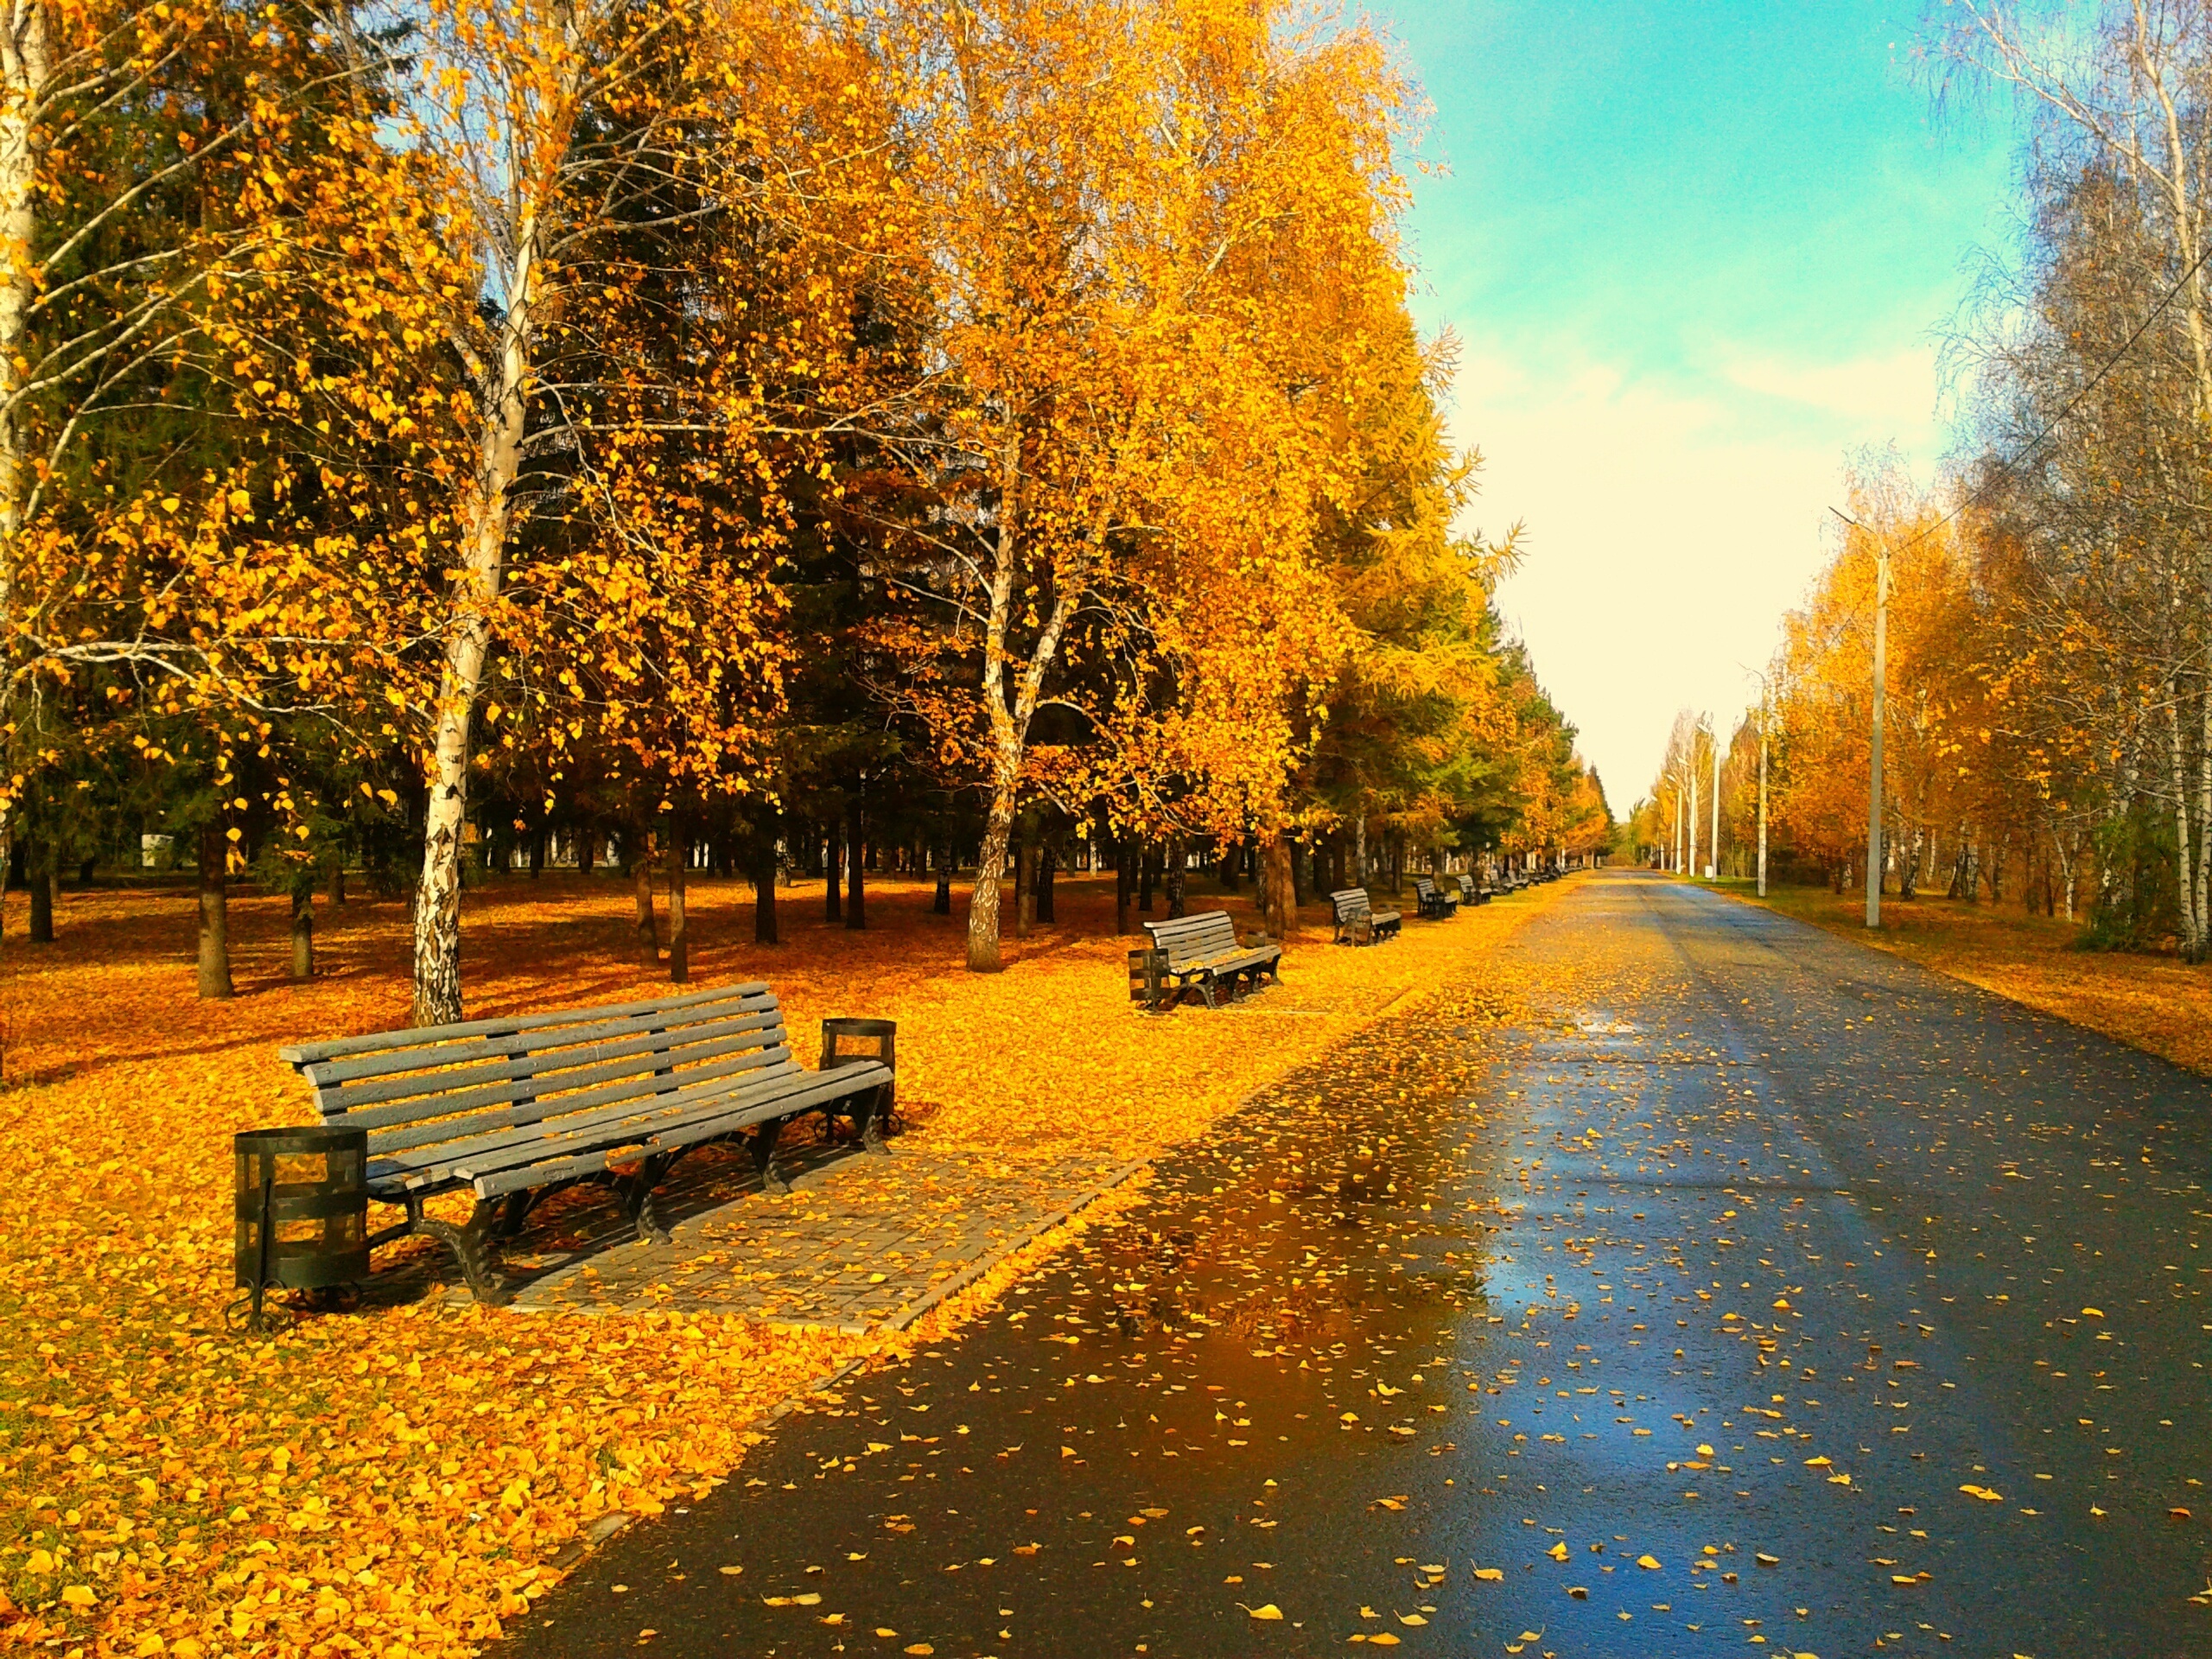 trees, Foliage, Leaves, Golden, Autumn, Bench, Bench, Park, Alley Wallpaper